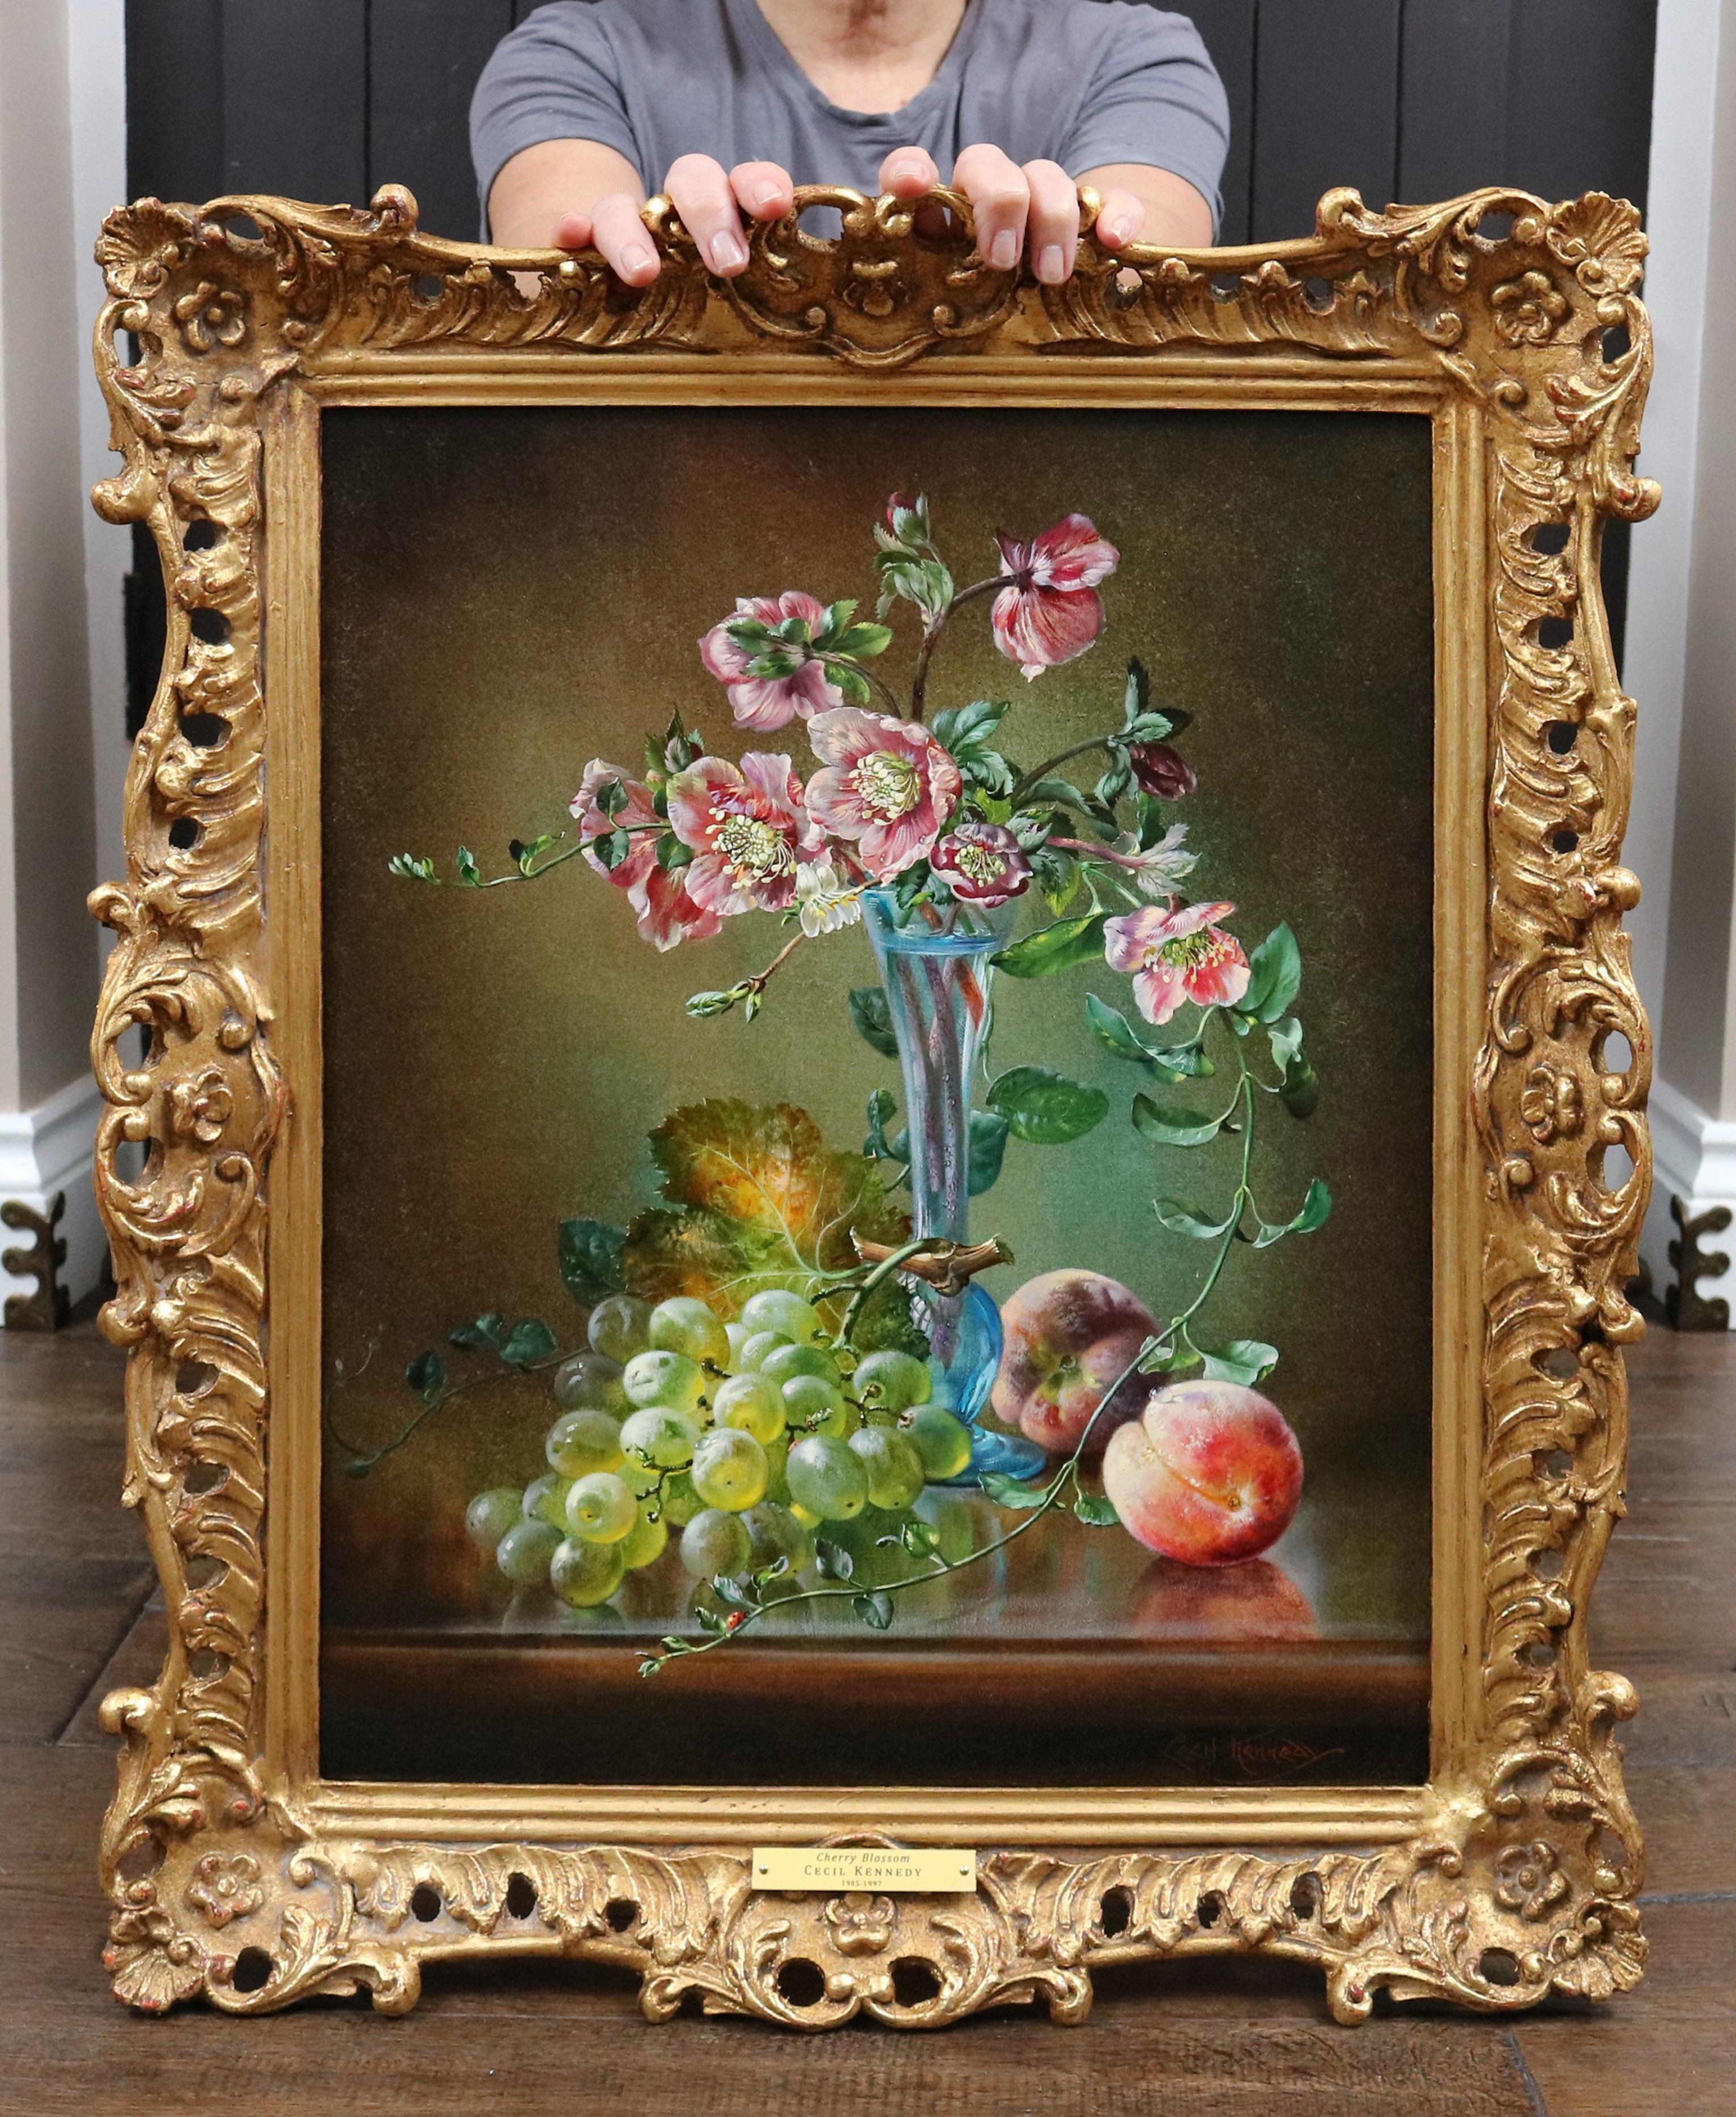 Cecil Kennedy Animal Painting - Cherry Blossom - English Flower Oil Painting Still Life with Grapes and Peaches